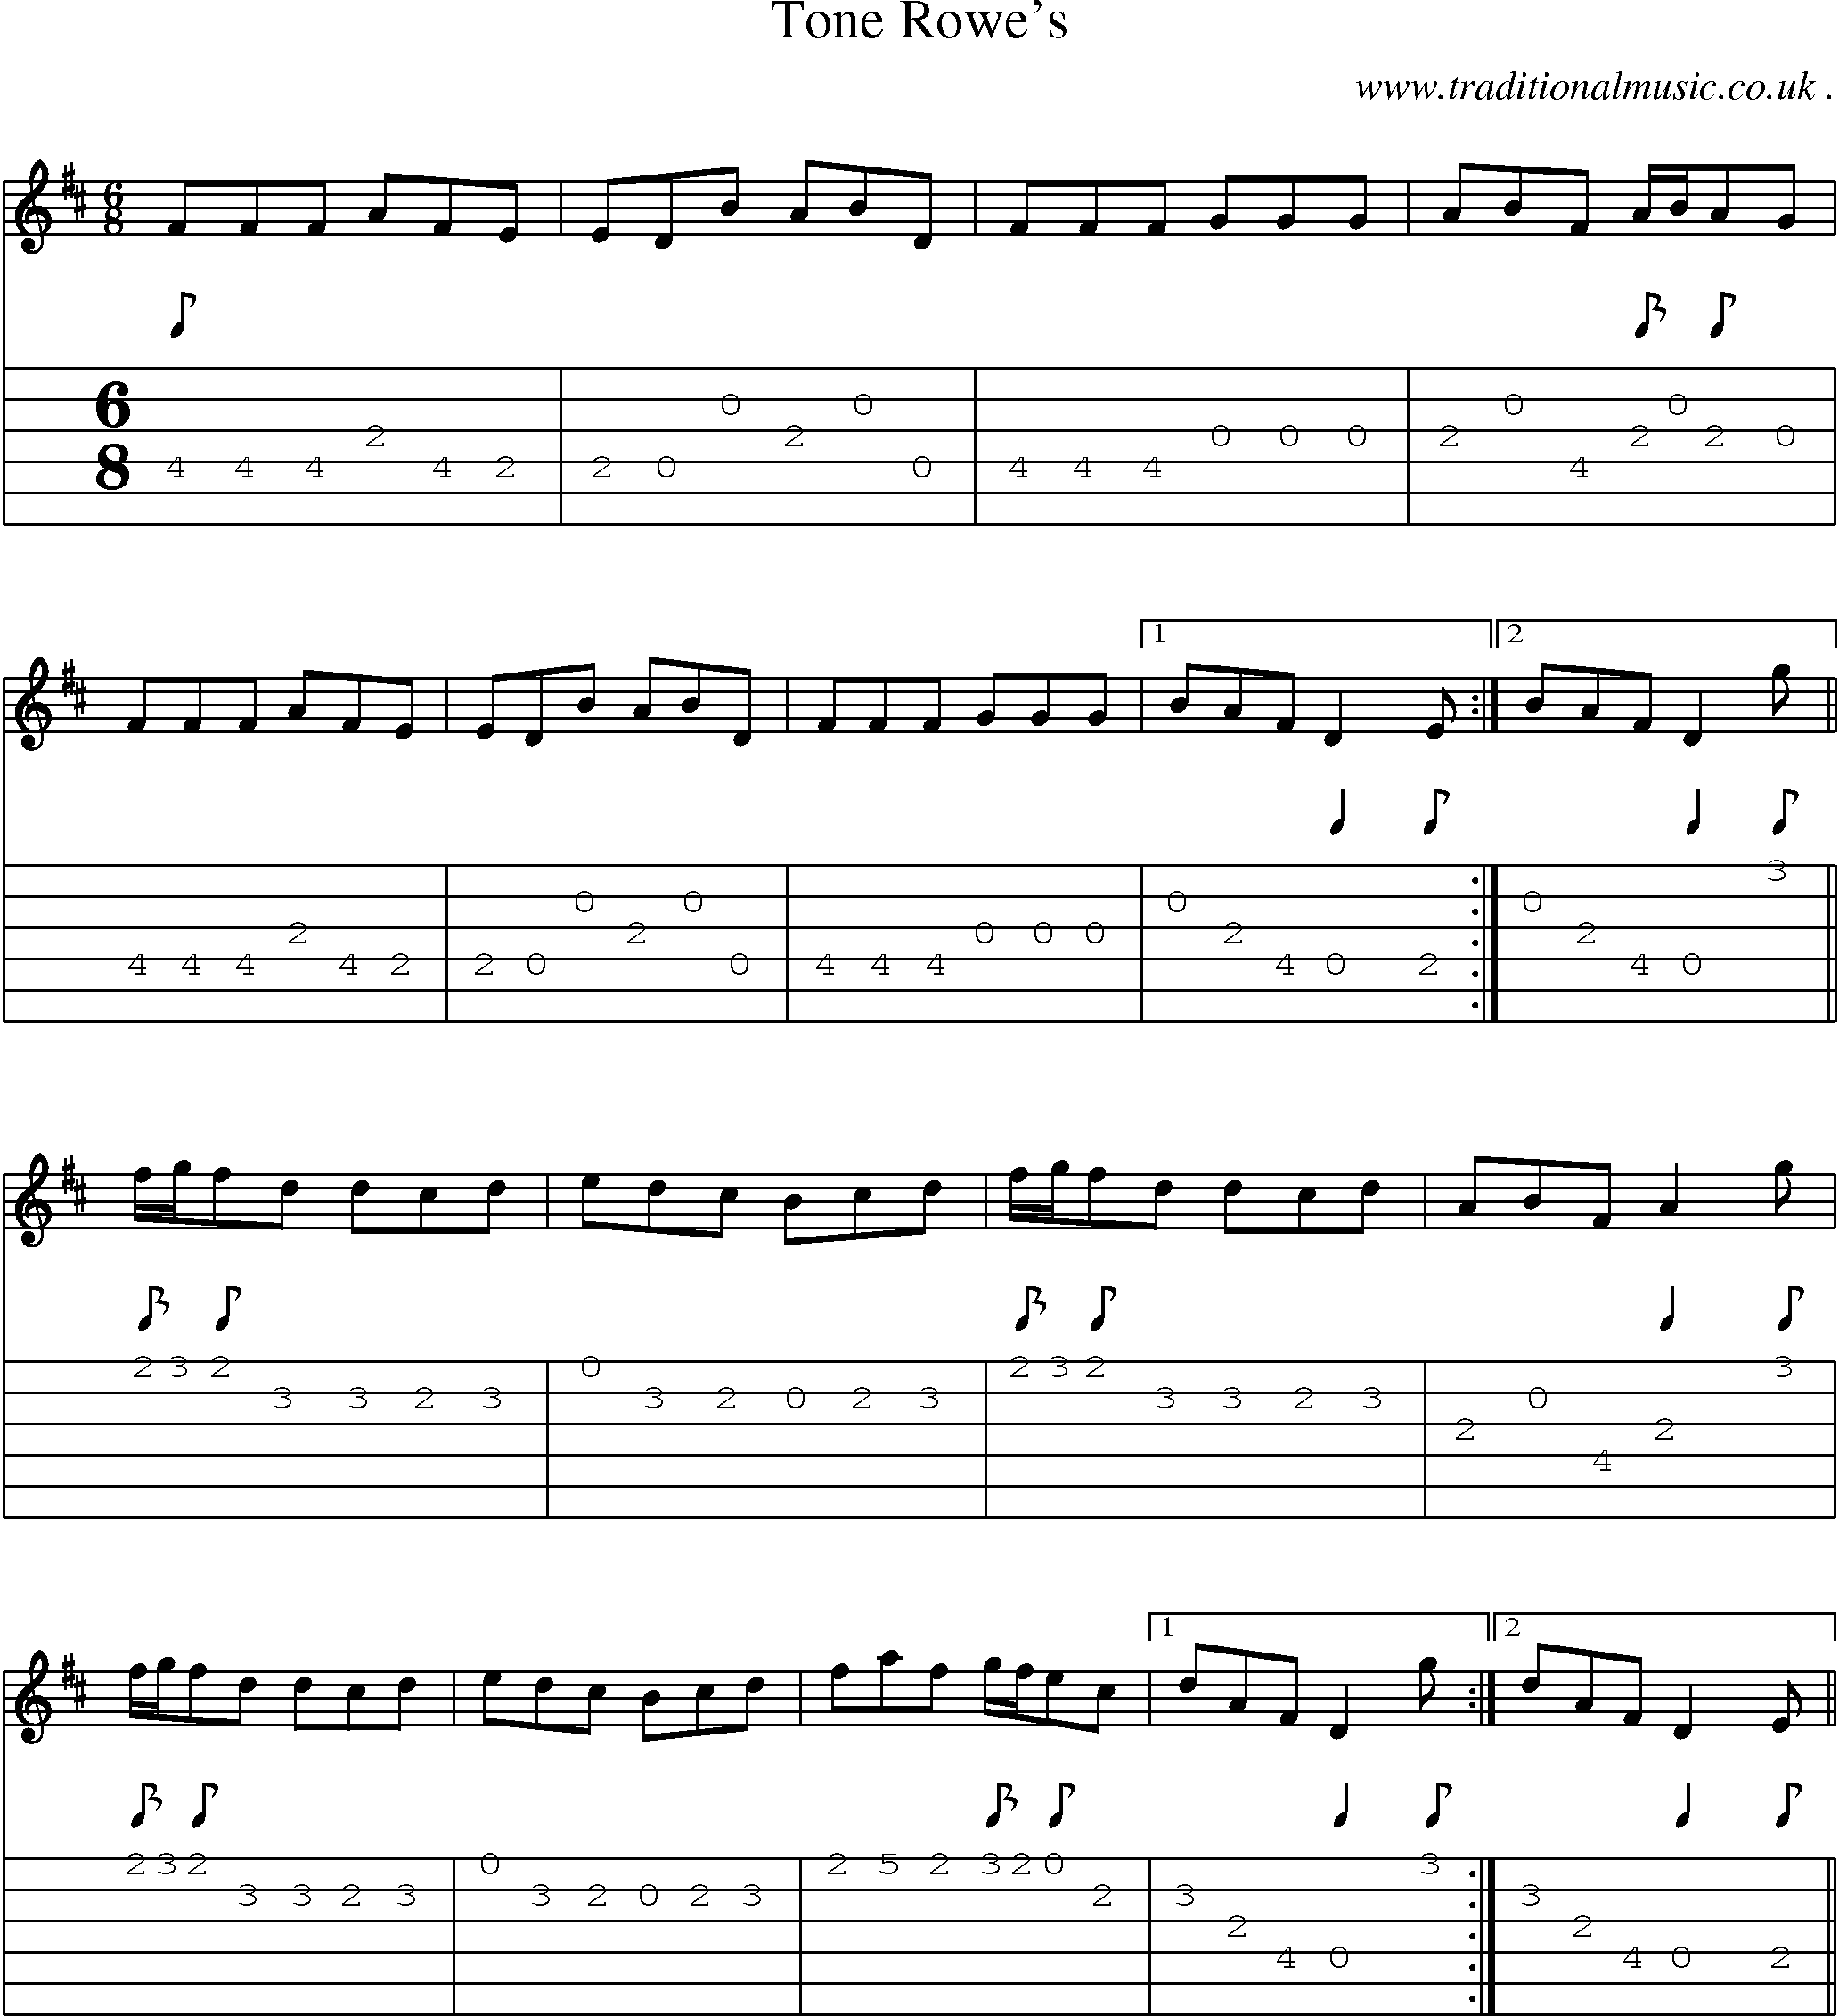 Sheet-Music and Guitar Tabs for Tone Rowes